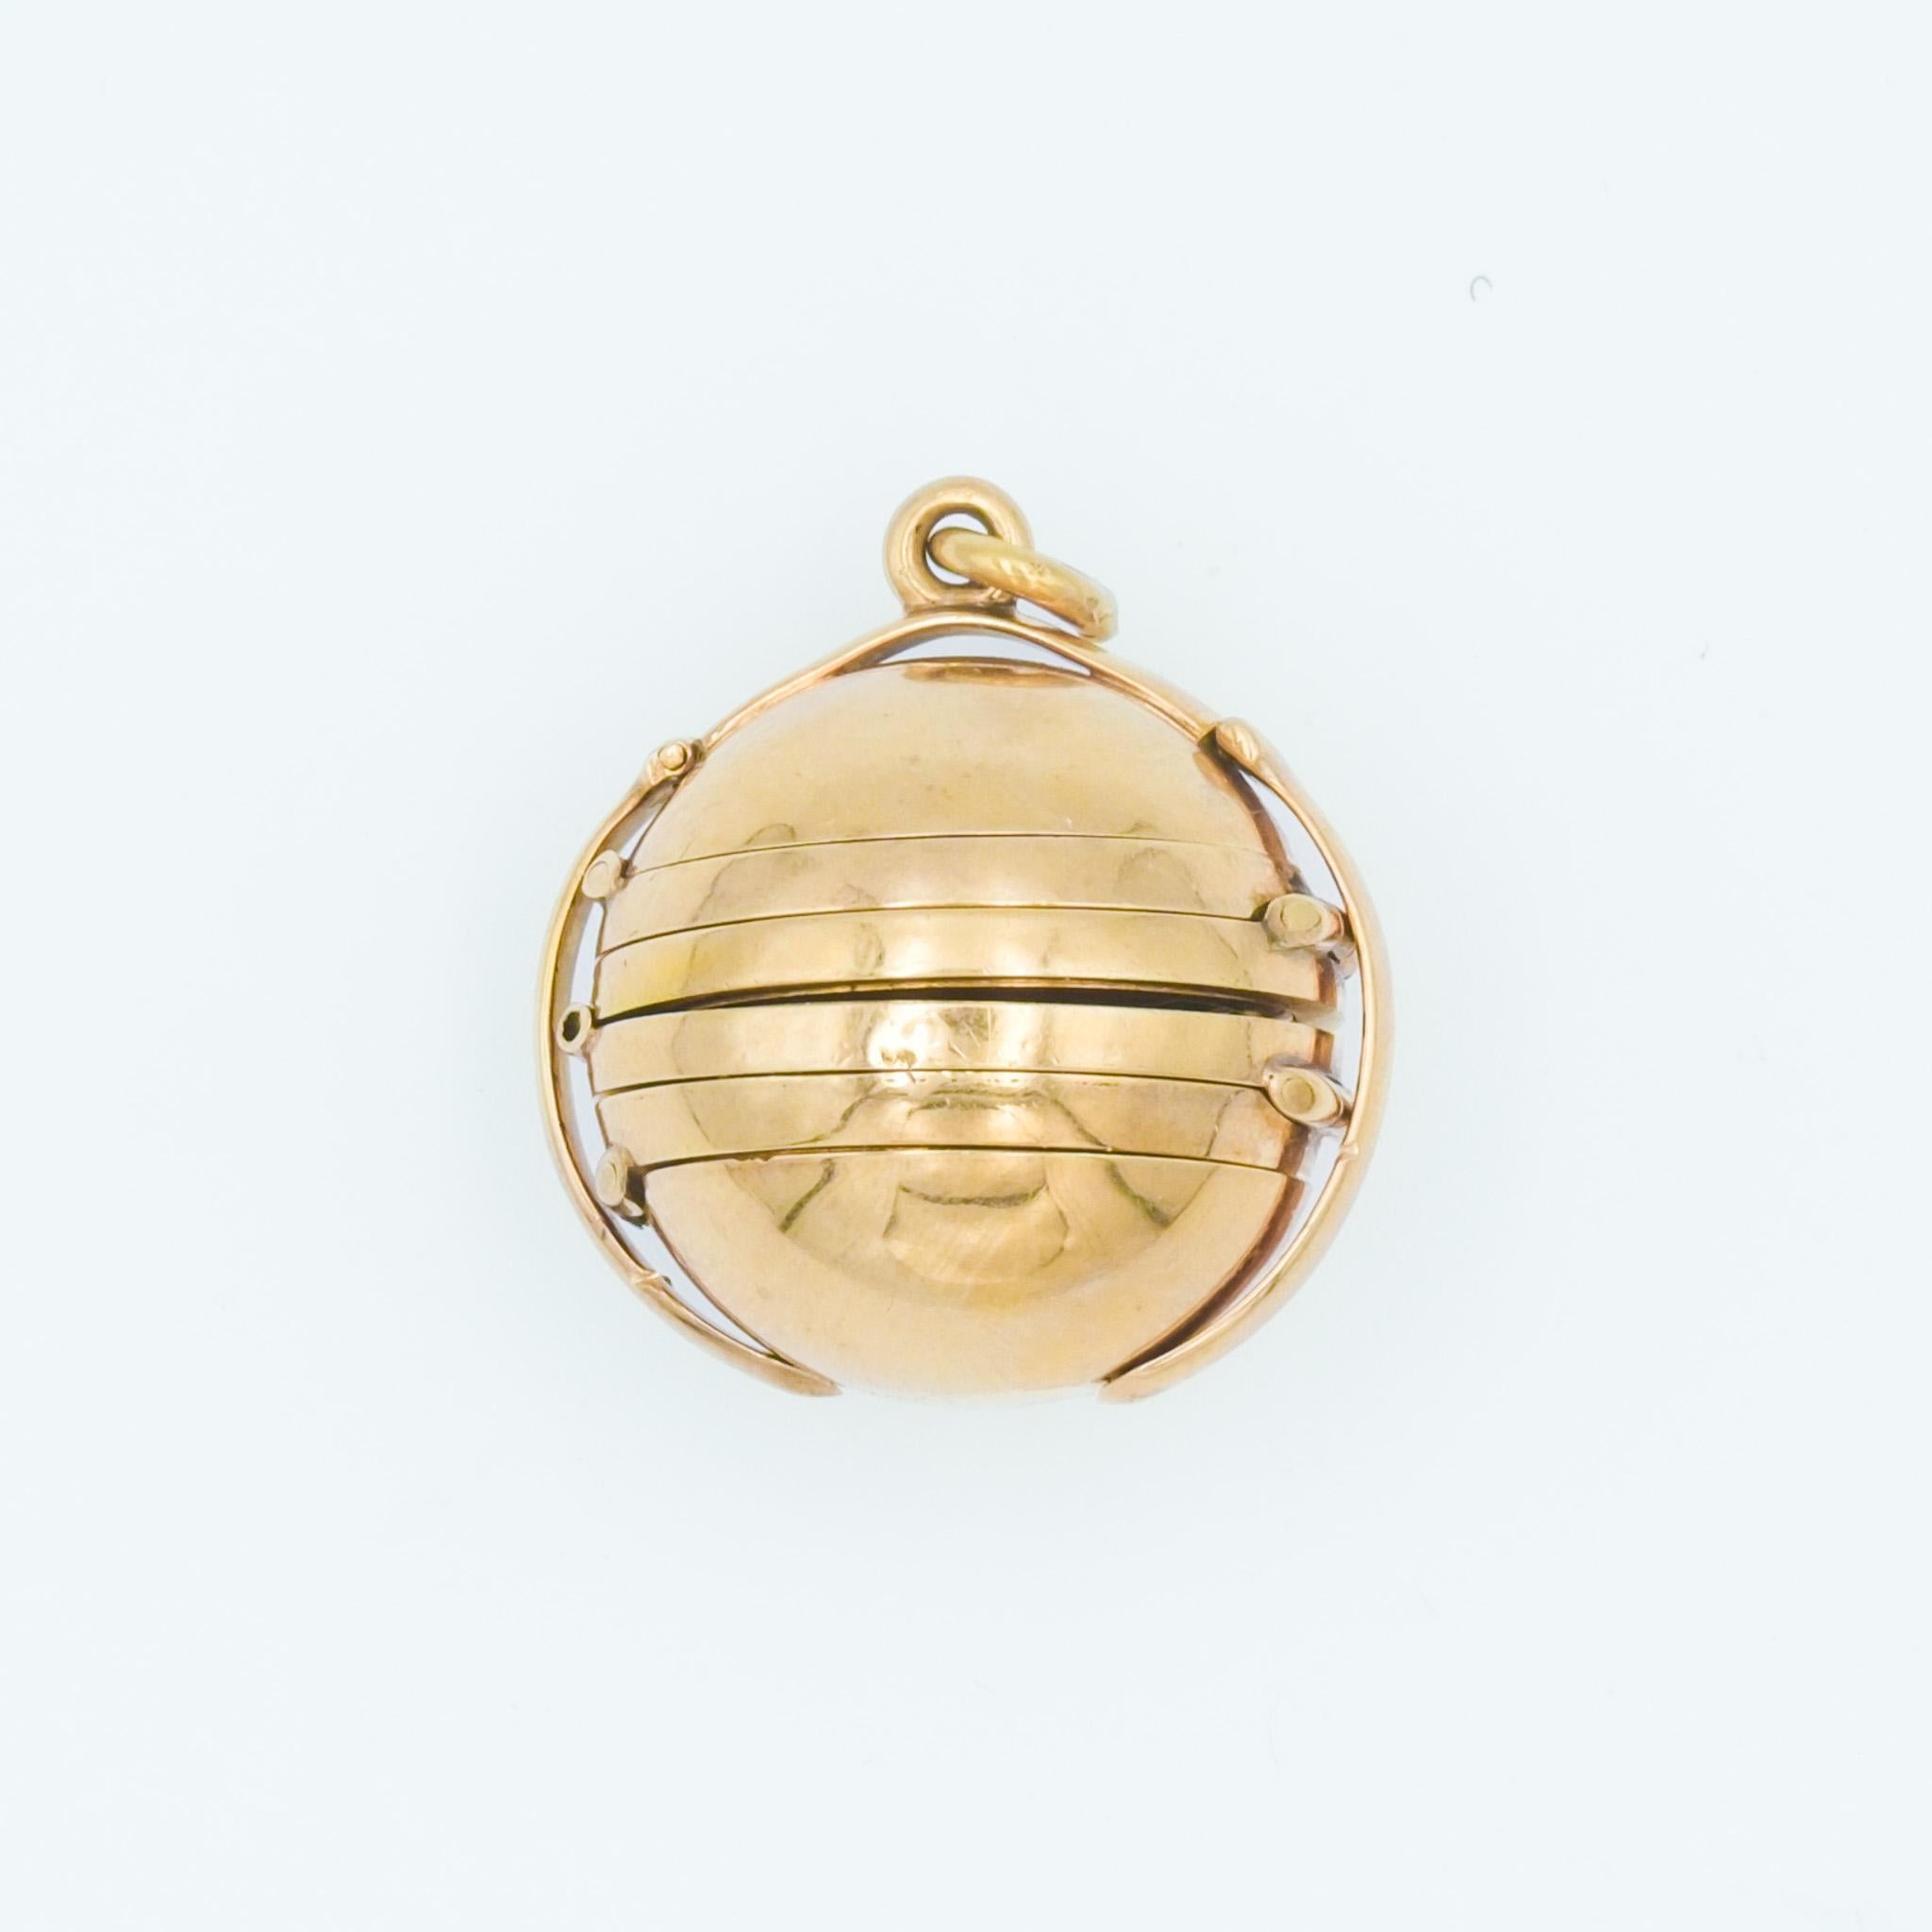 This 14-karat yellow gold locket is a remarkable piece, blending intricate craftsmanship with personal history. 

Designed to resemble a globe, the pendant opens to reveal a multi-photo locket feature, capable of housing six photographs. Two of the